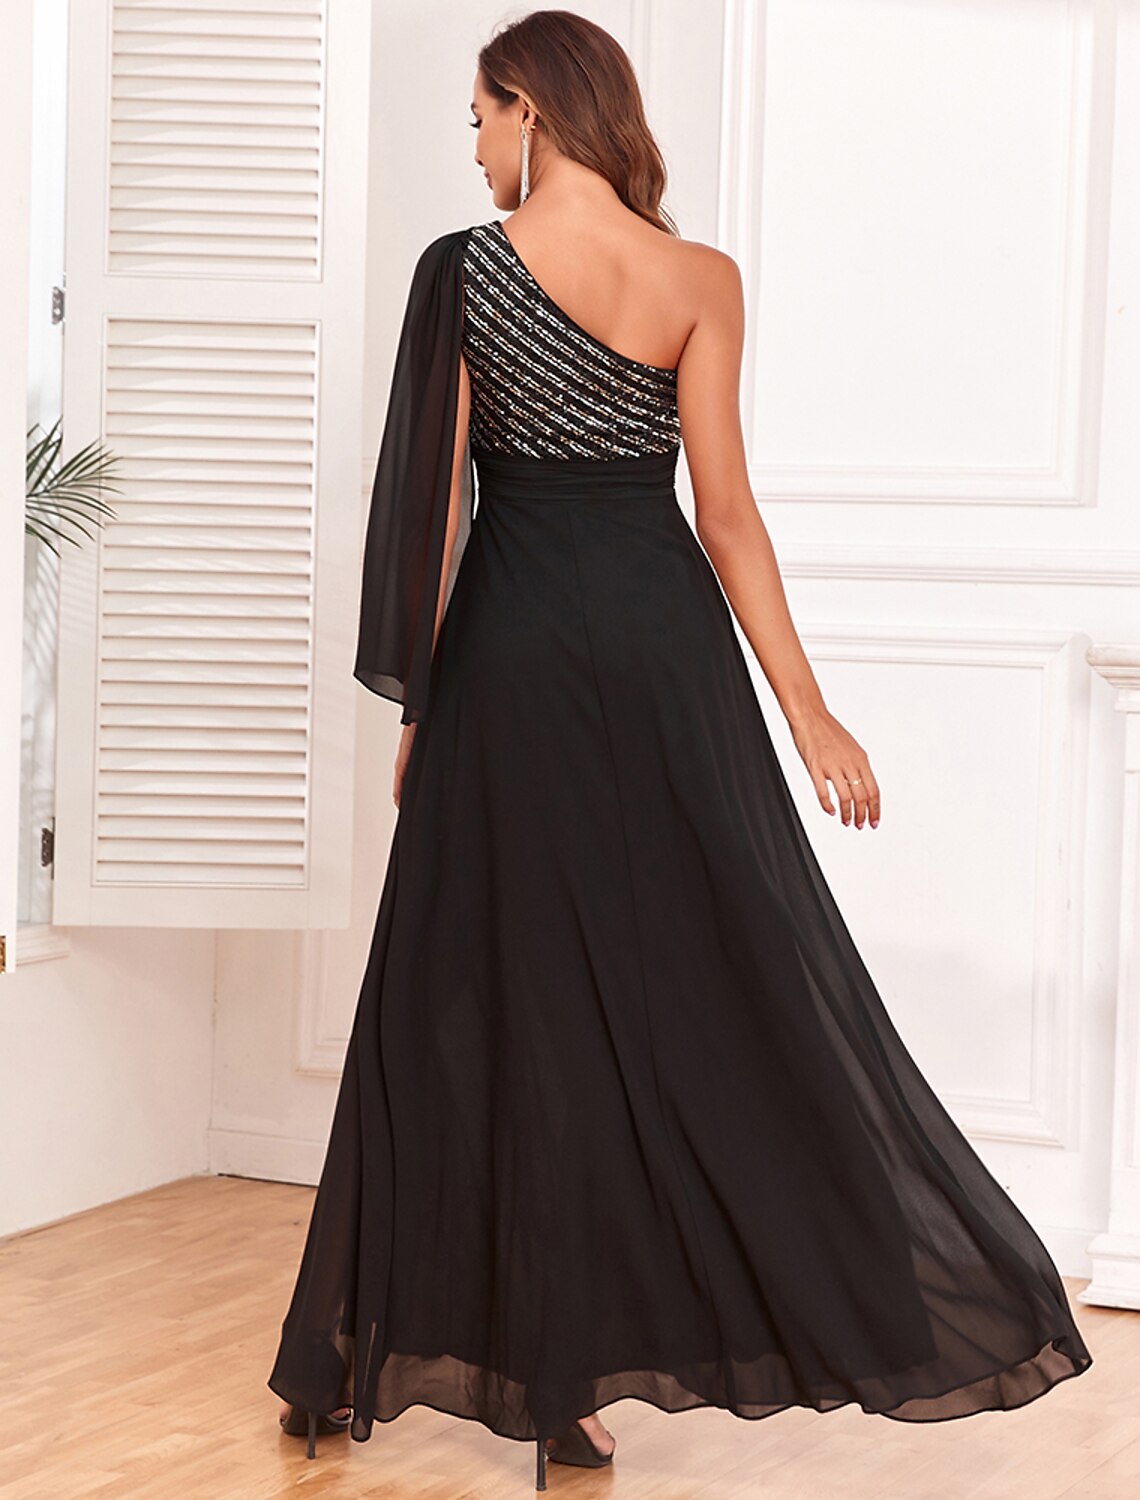 A-Line Evening Gown Empire Dress Evening Party Floor Length Long Sleeve One Shoulder Chiffon with Glitter Slit